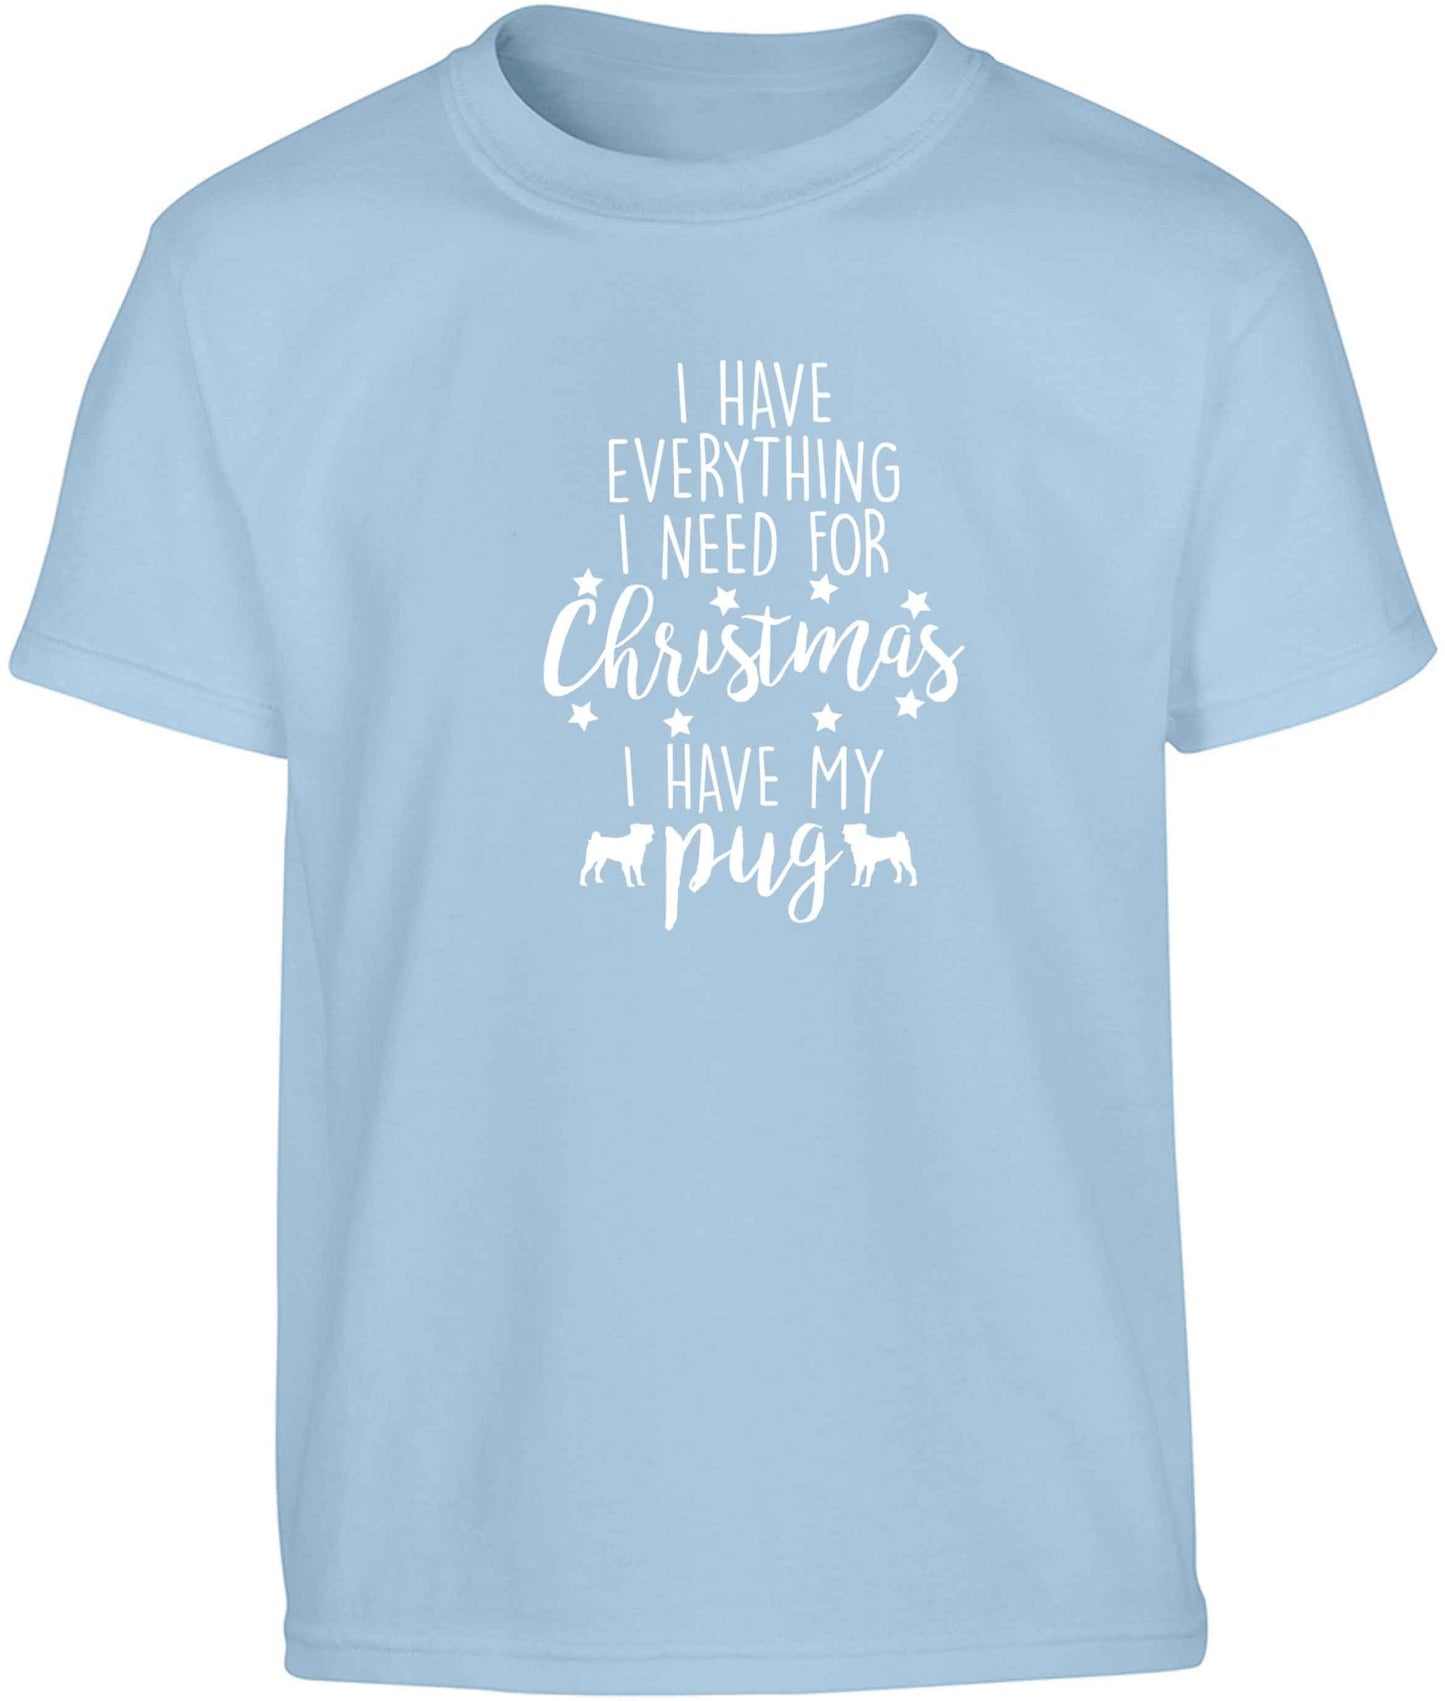 I have everything I need for Christmas I have my pug Children's light blue Tshirt 12-13 Years